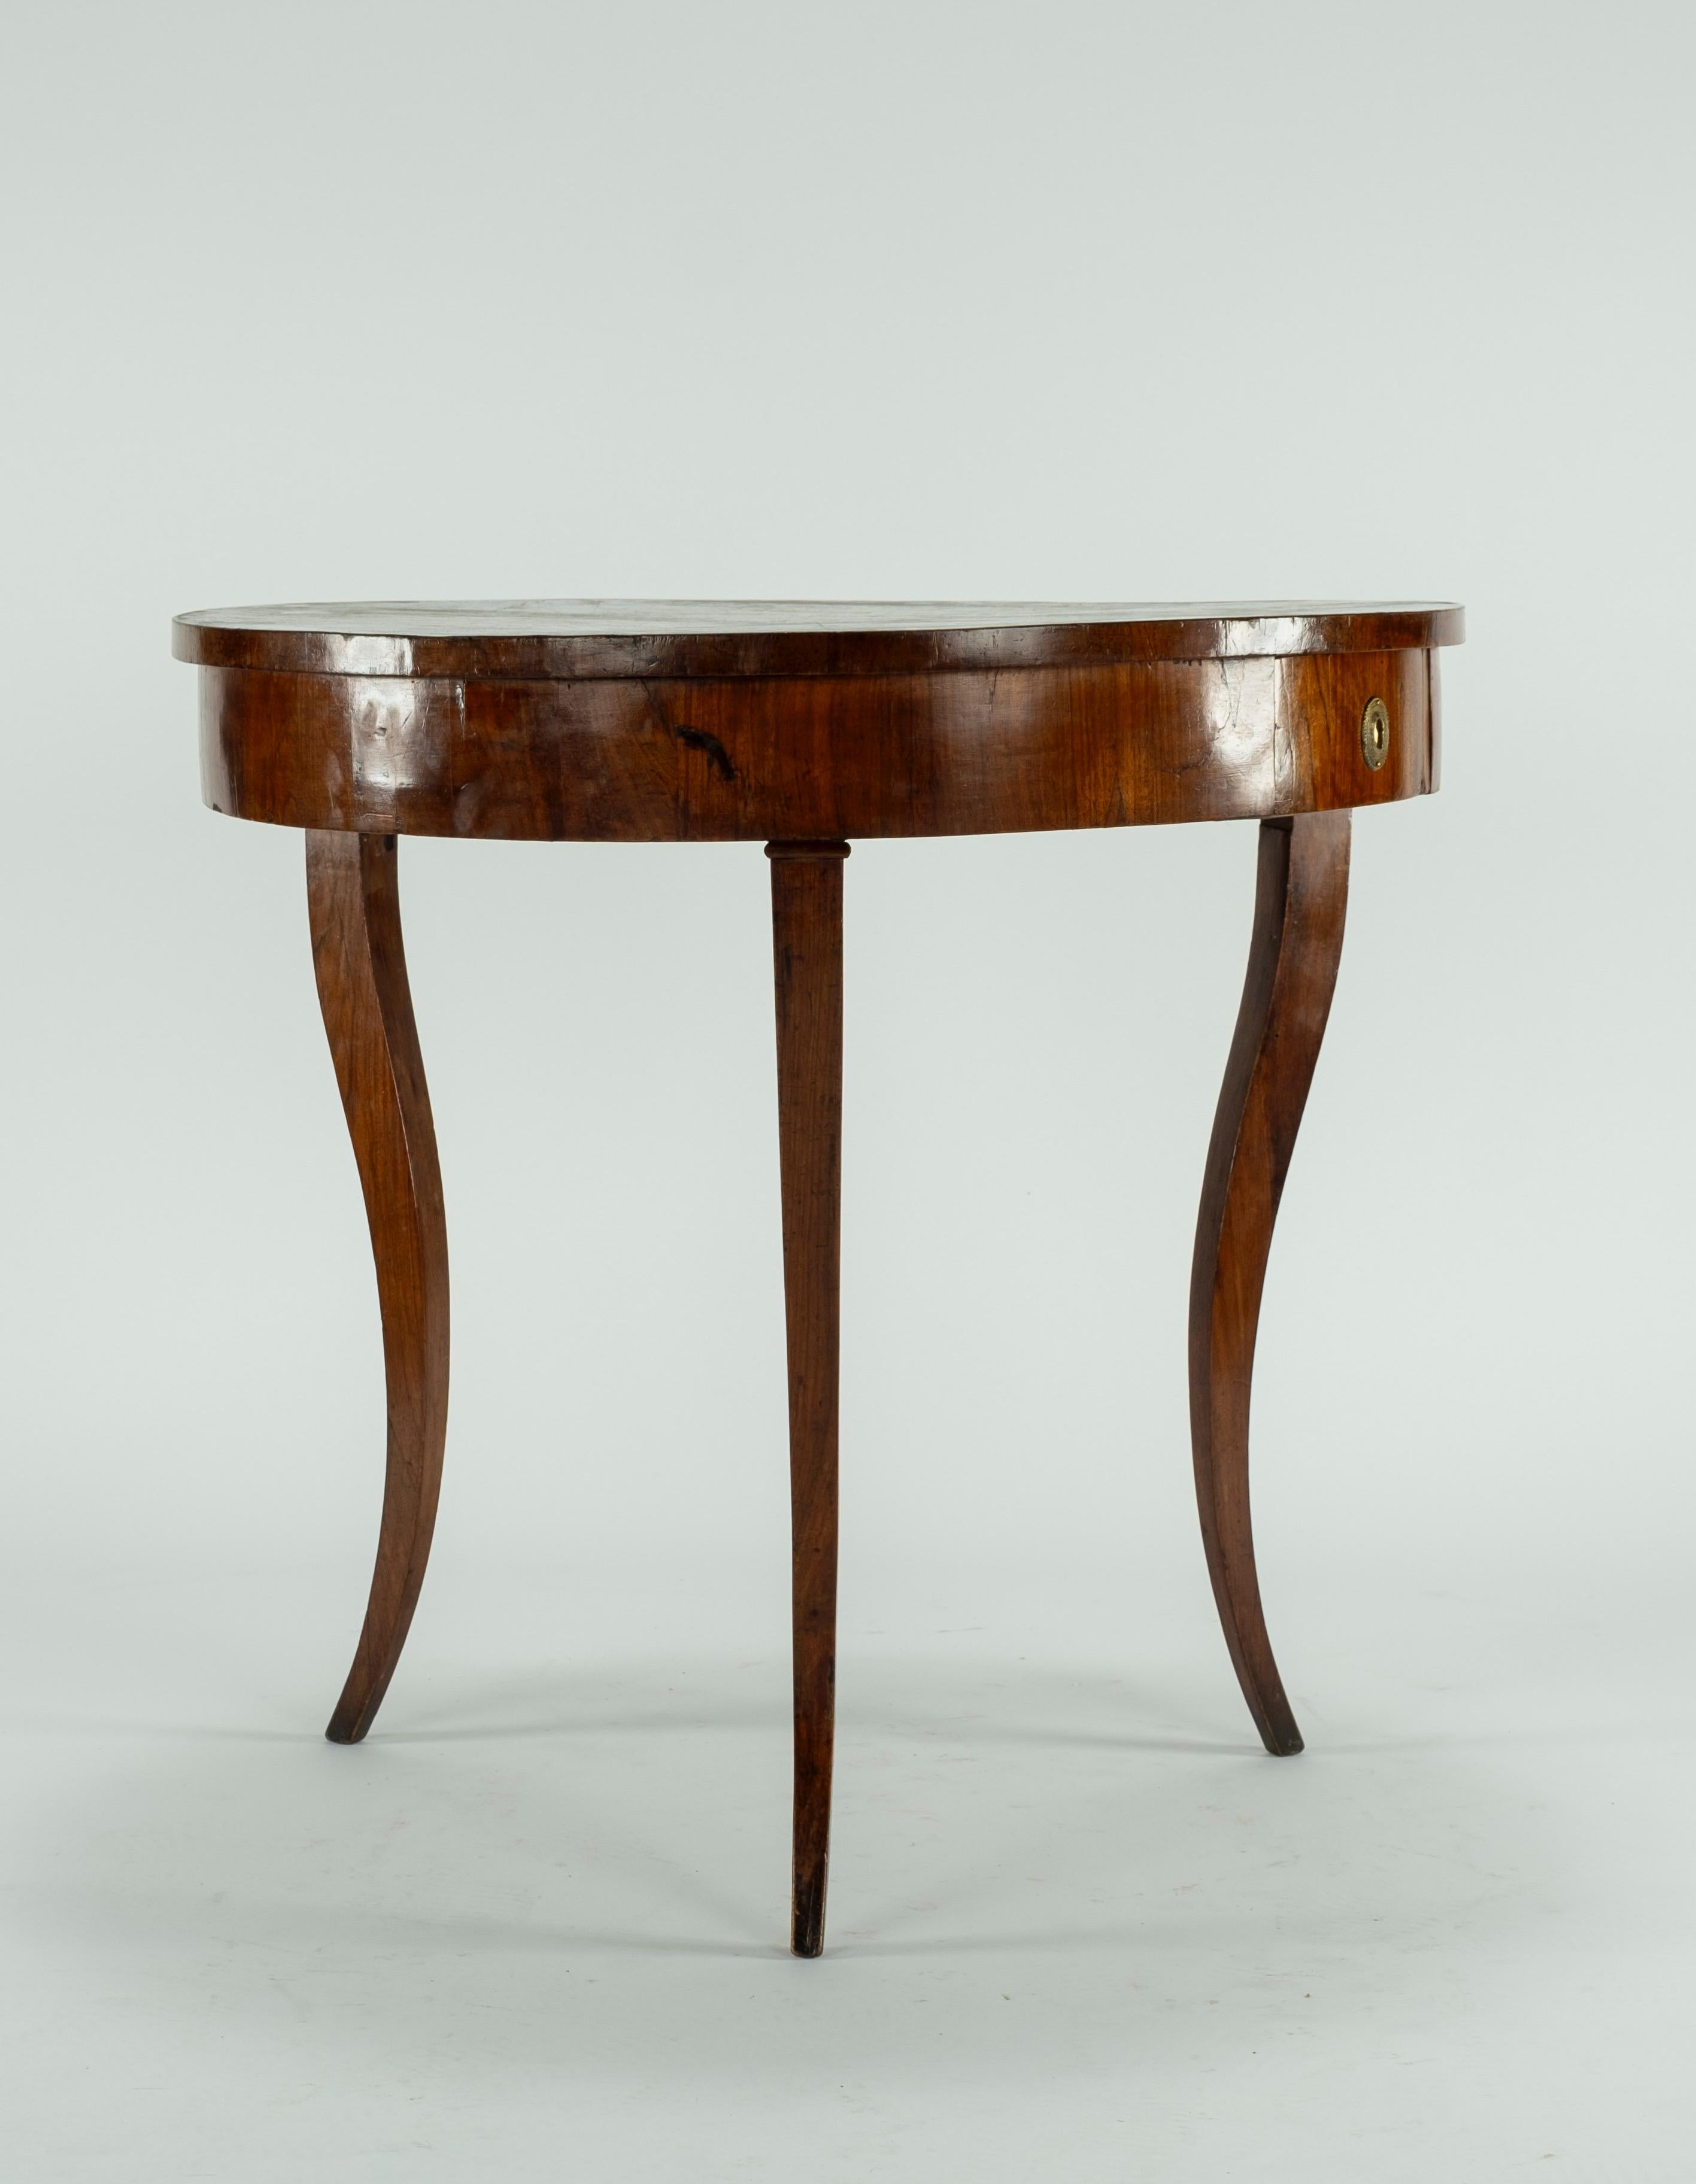 19th century three legged walnut Italian table with a drawer. Exaggerated movement of the legs gives this piece a very elegant and delicate feel. Sturdy piece.